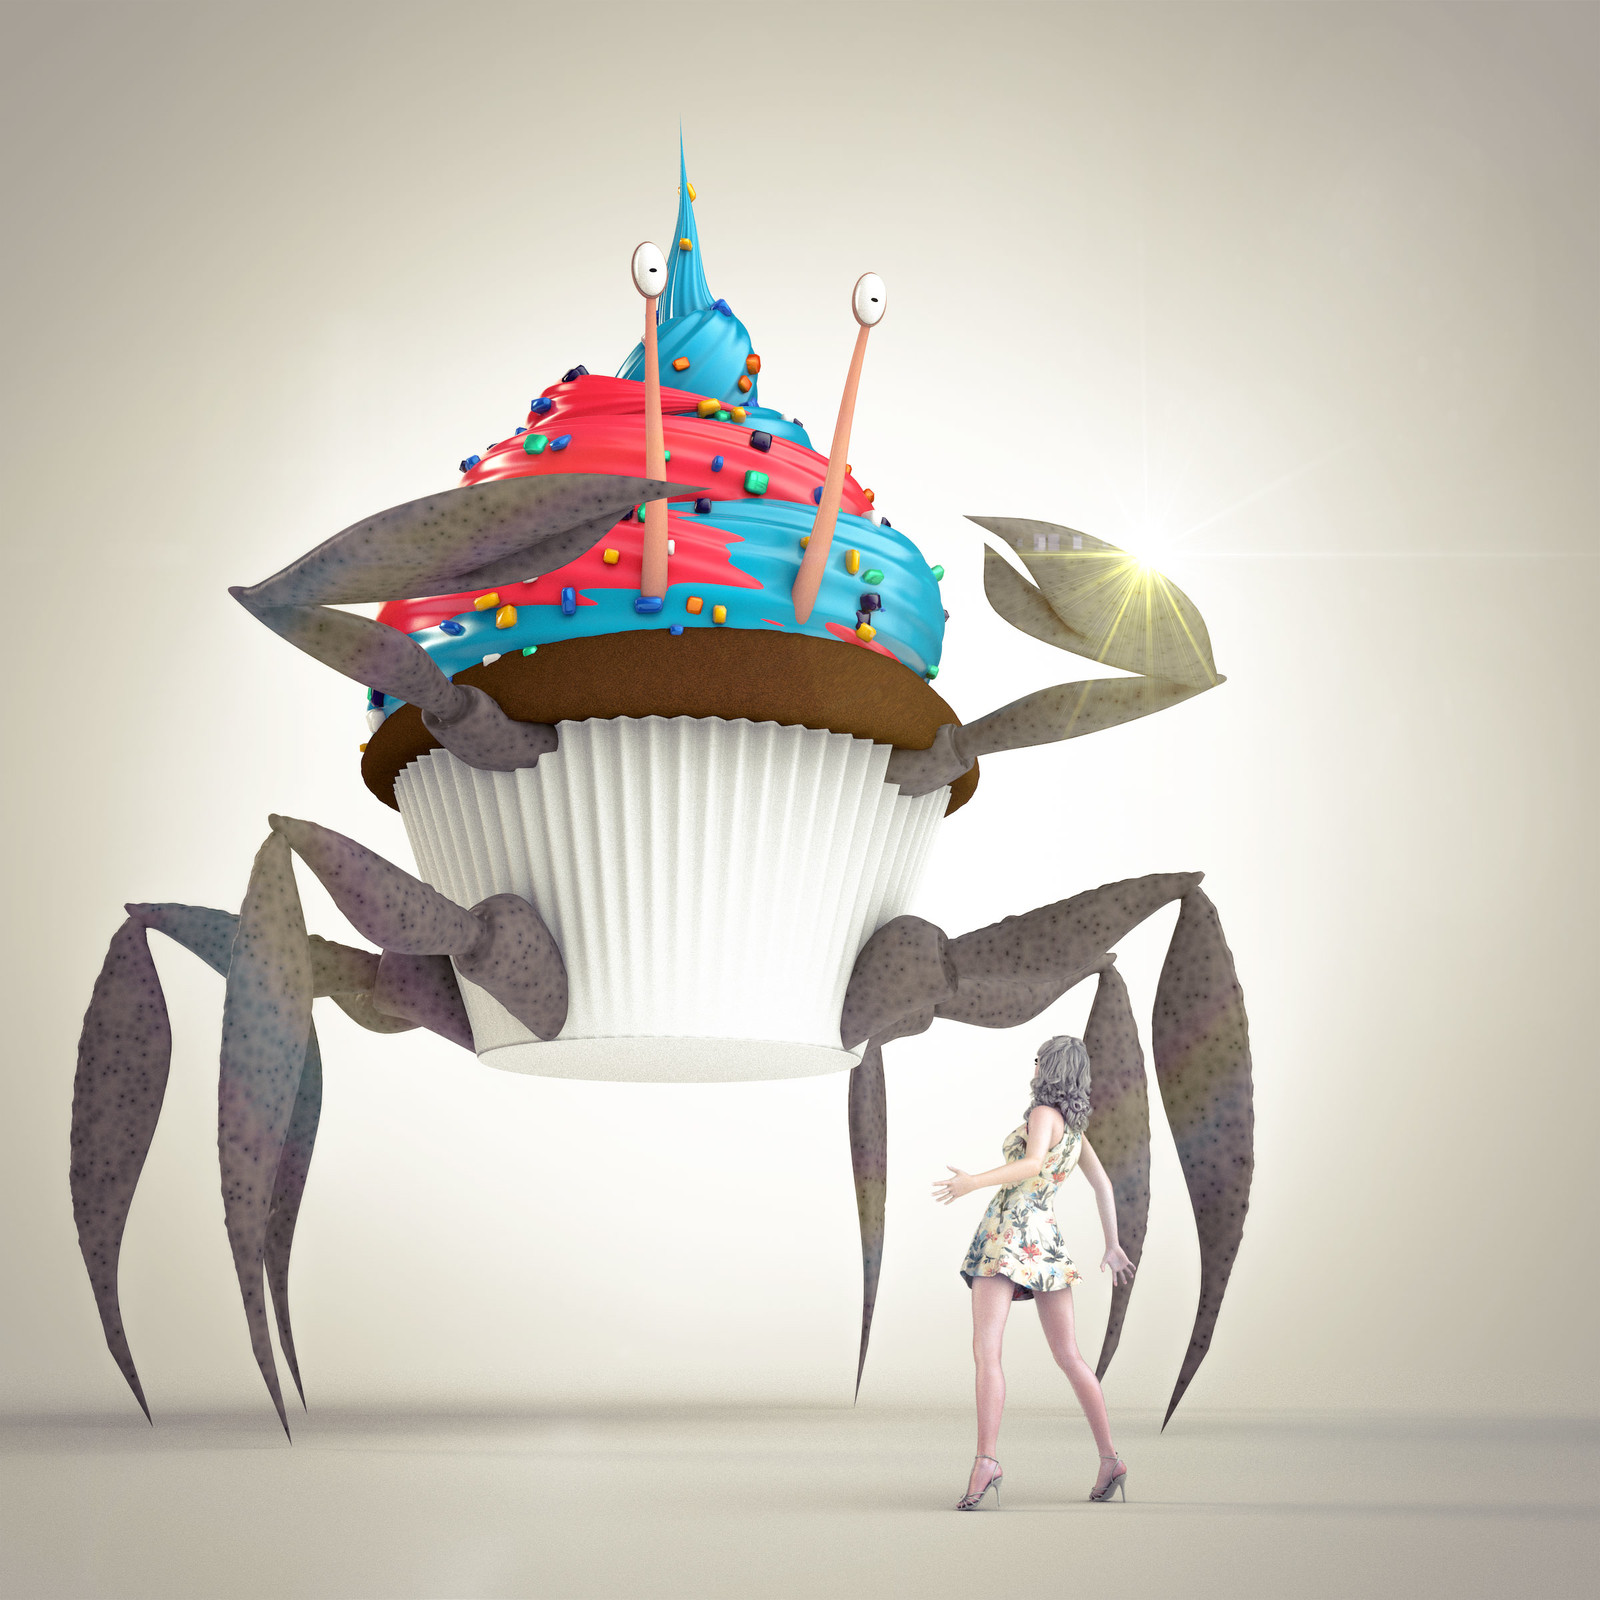 Cupcake Overlord final render